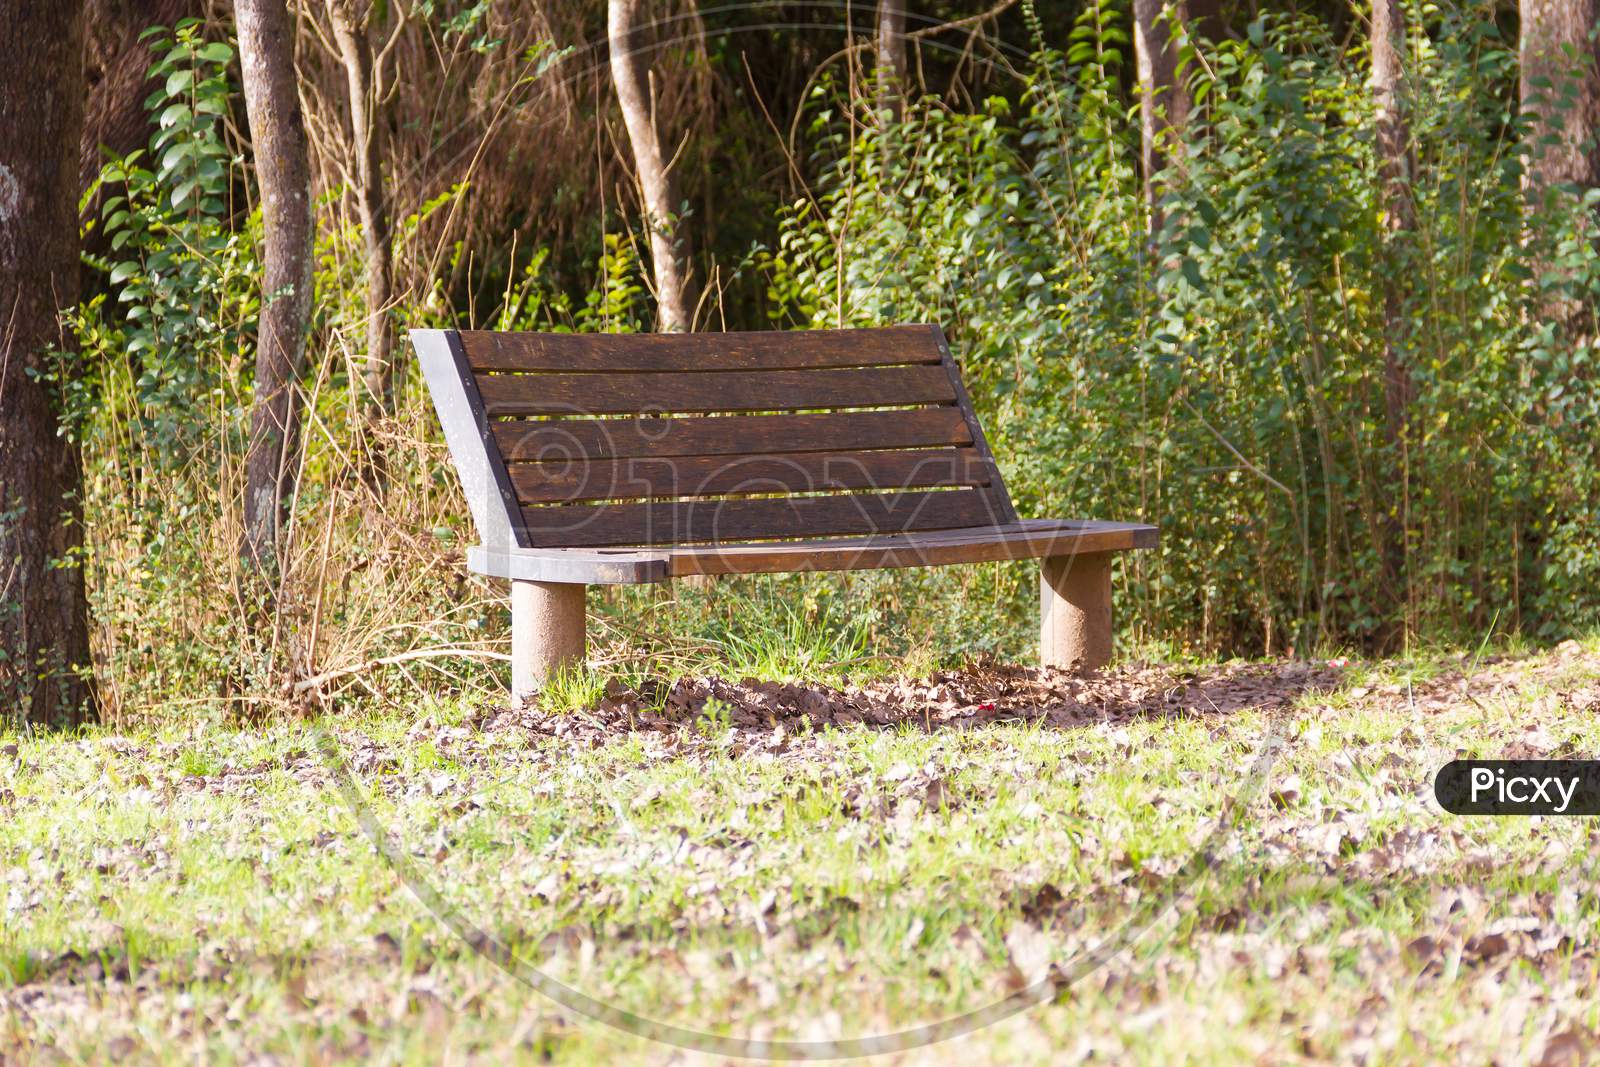 Lonely Bench Under The Trees And With The Fallen Leaves In Autumn